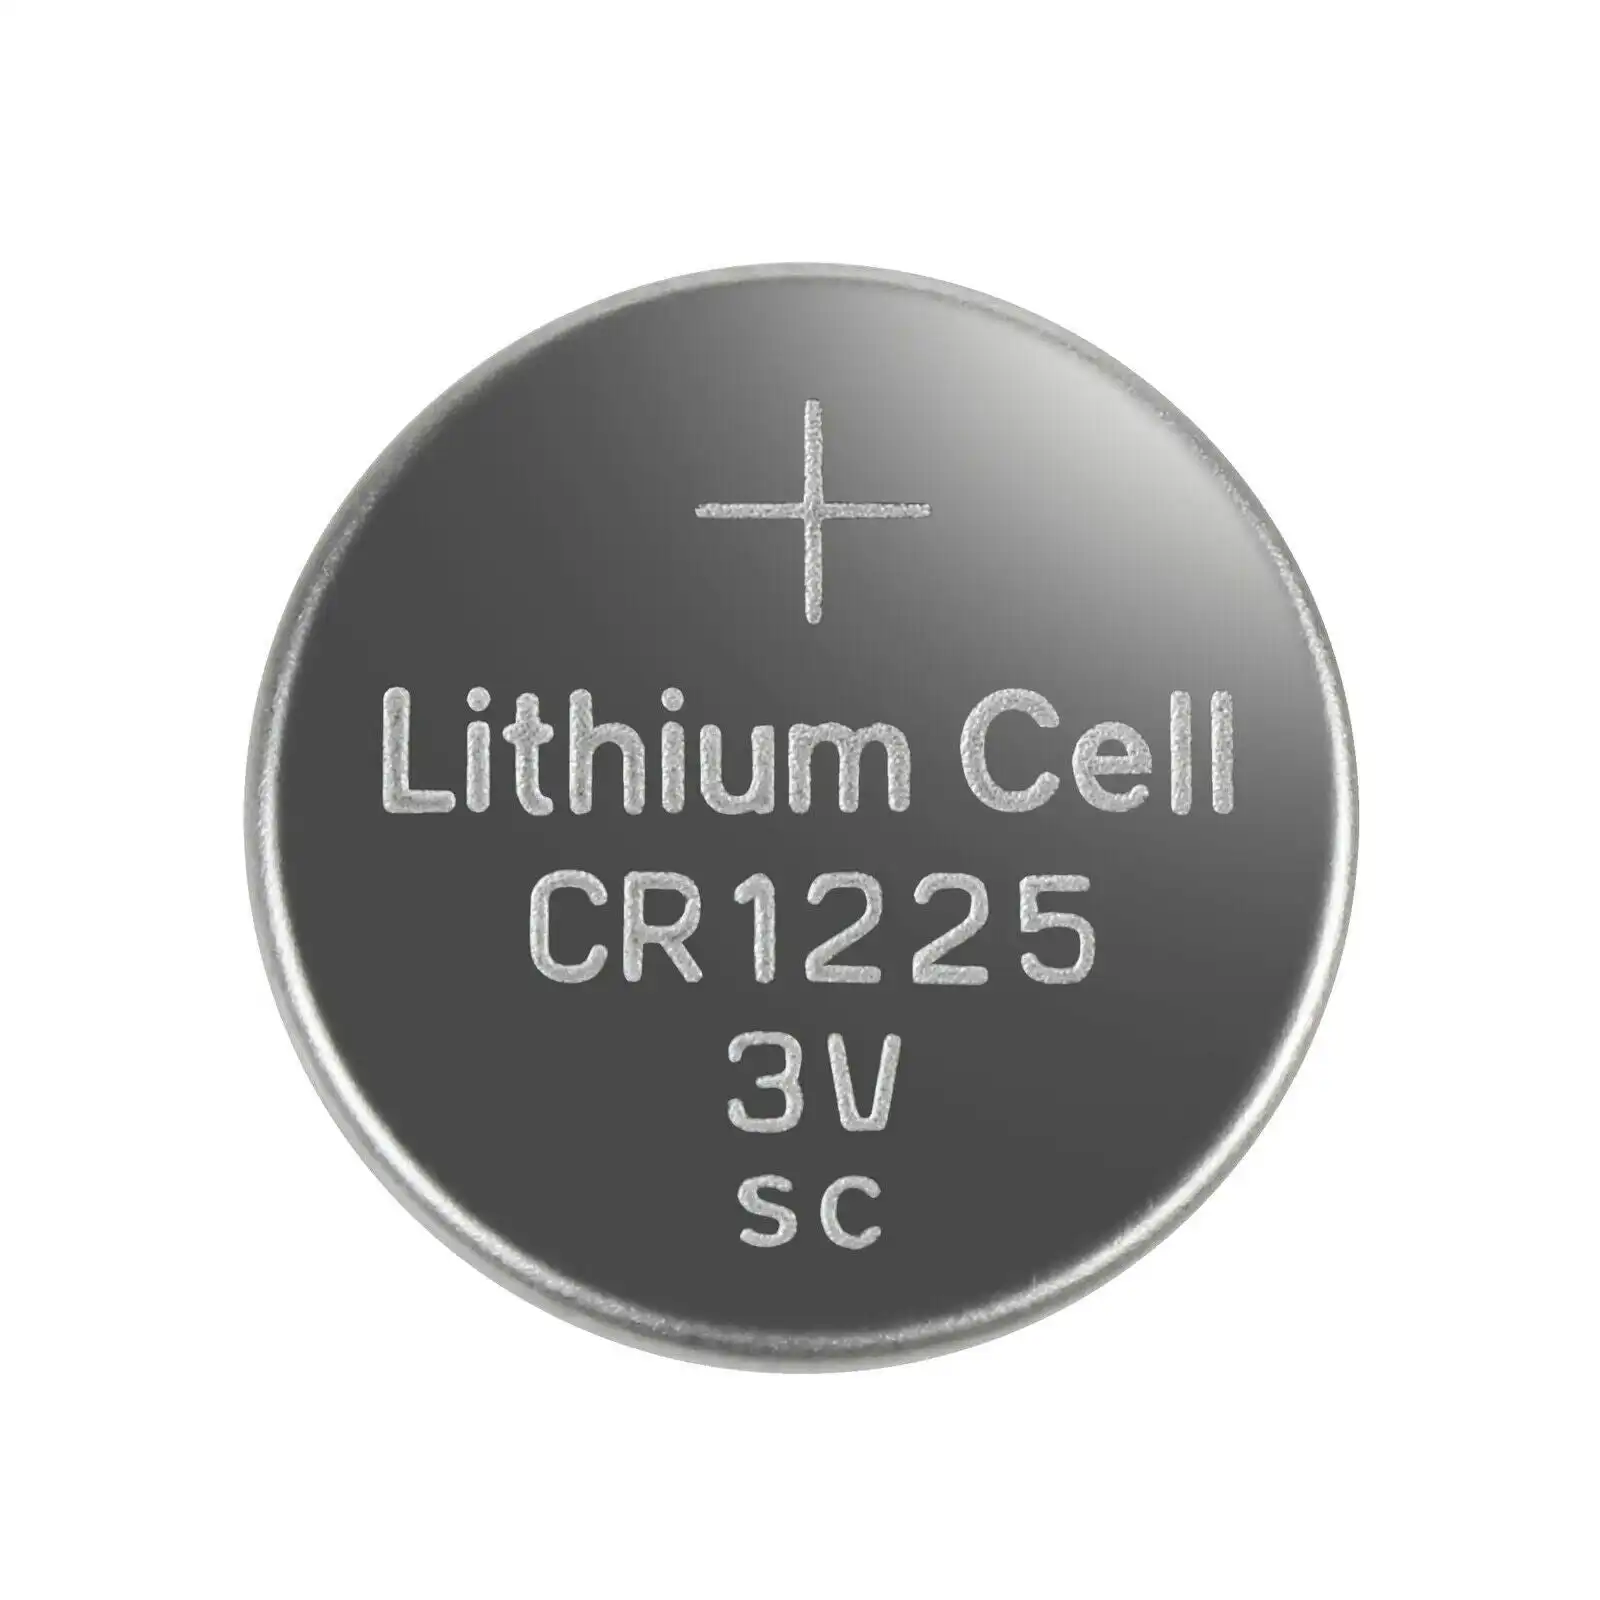 5 Pack CR1225 Button Cell Batteries for toys watches remotes calculators